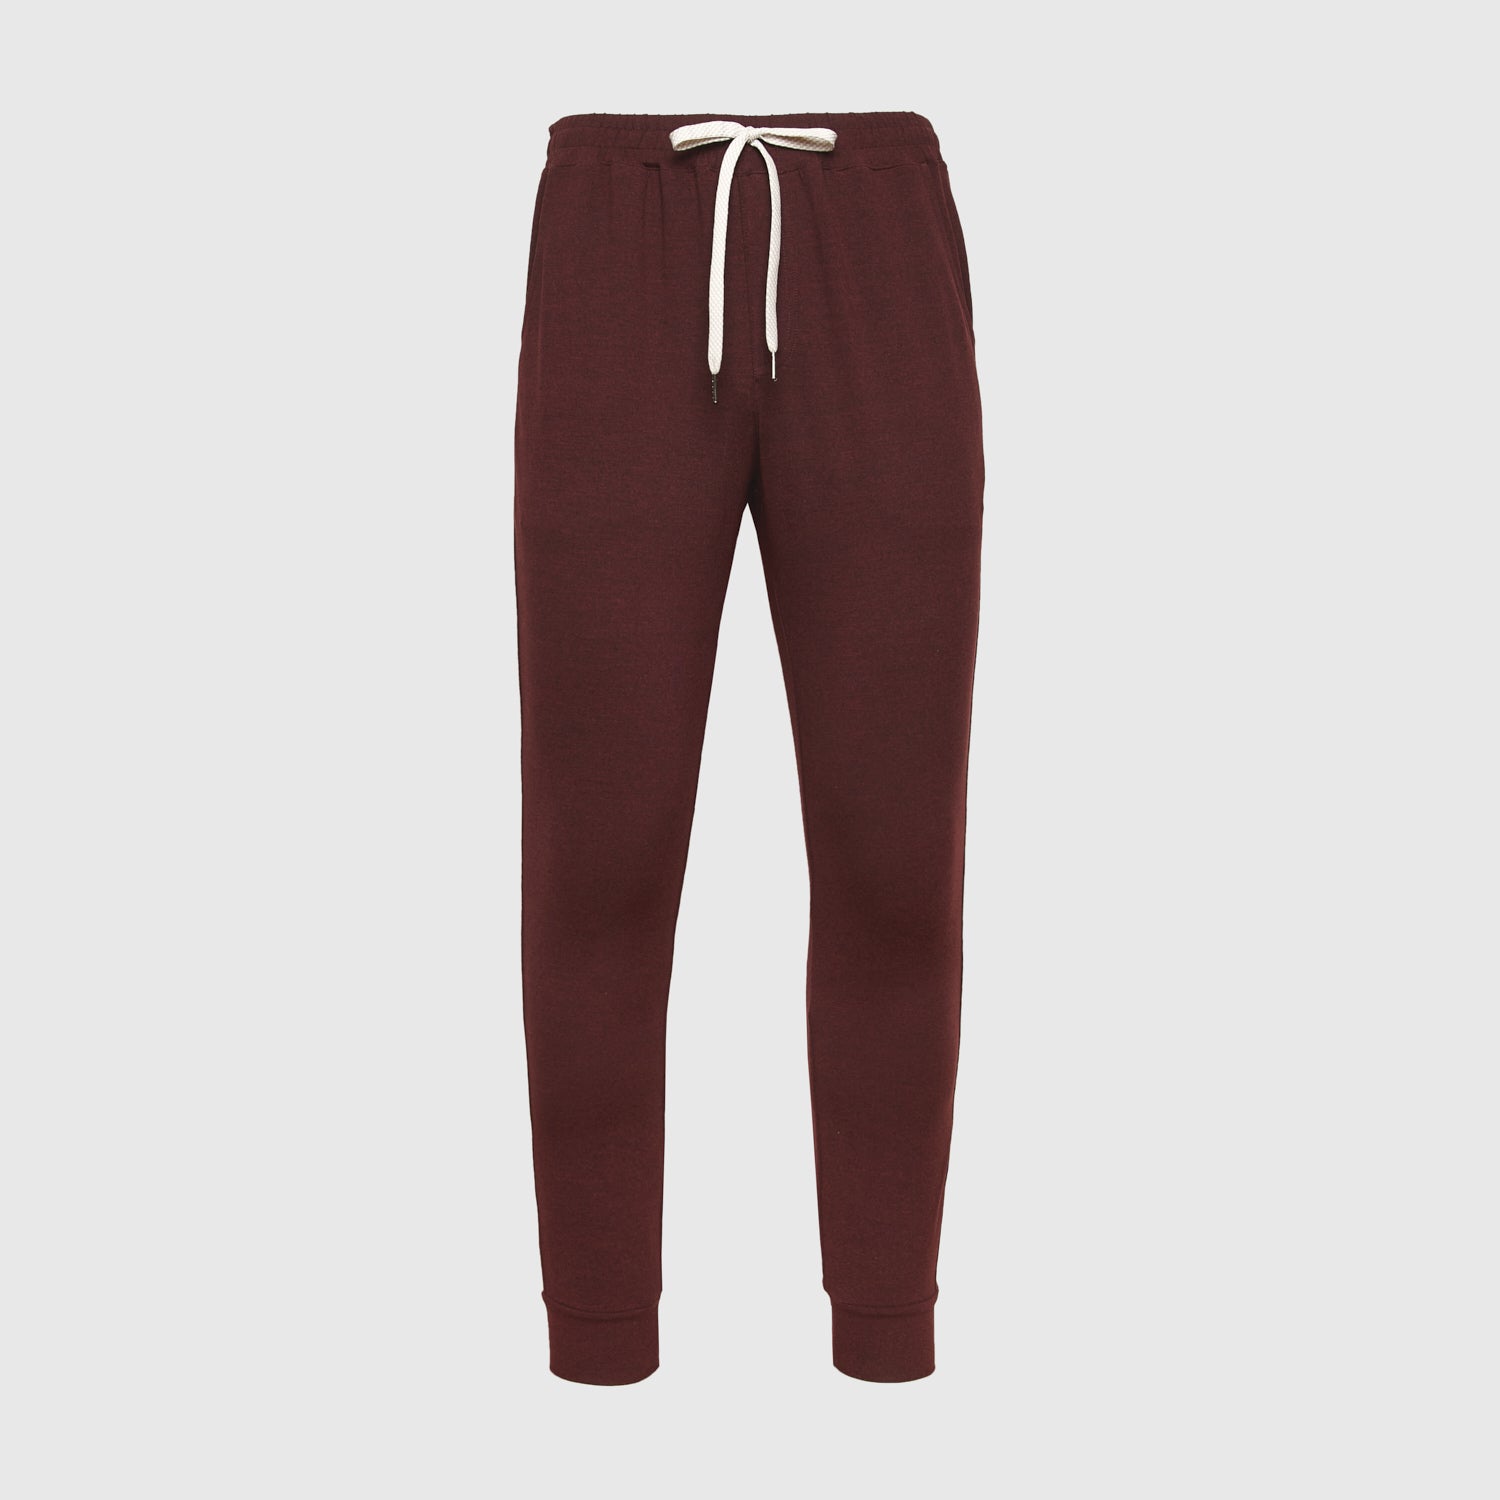 Active Life Burgundy Active Pants Size S - 67% off